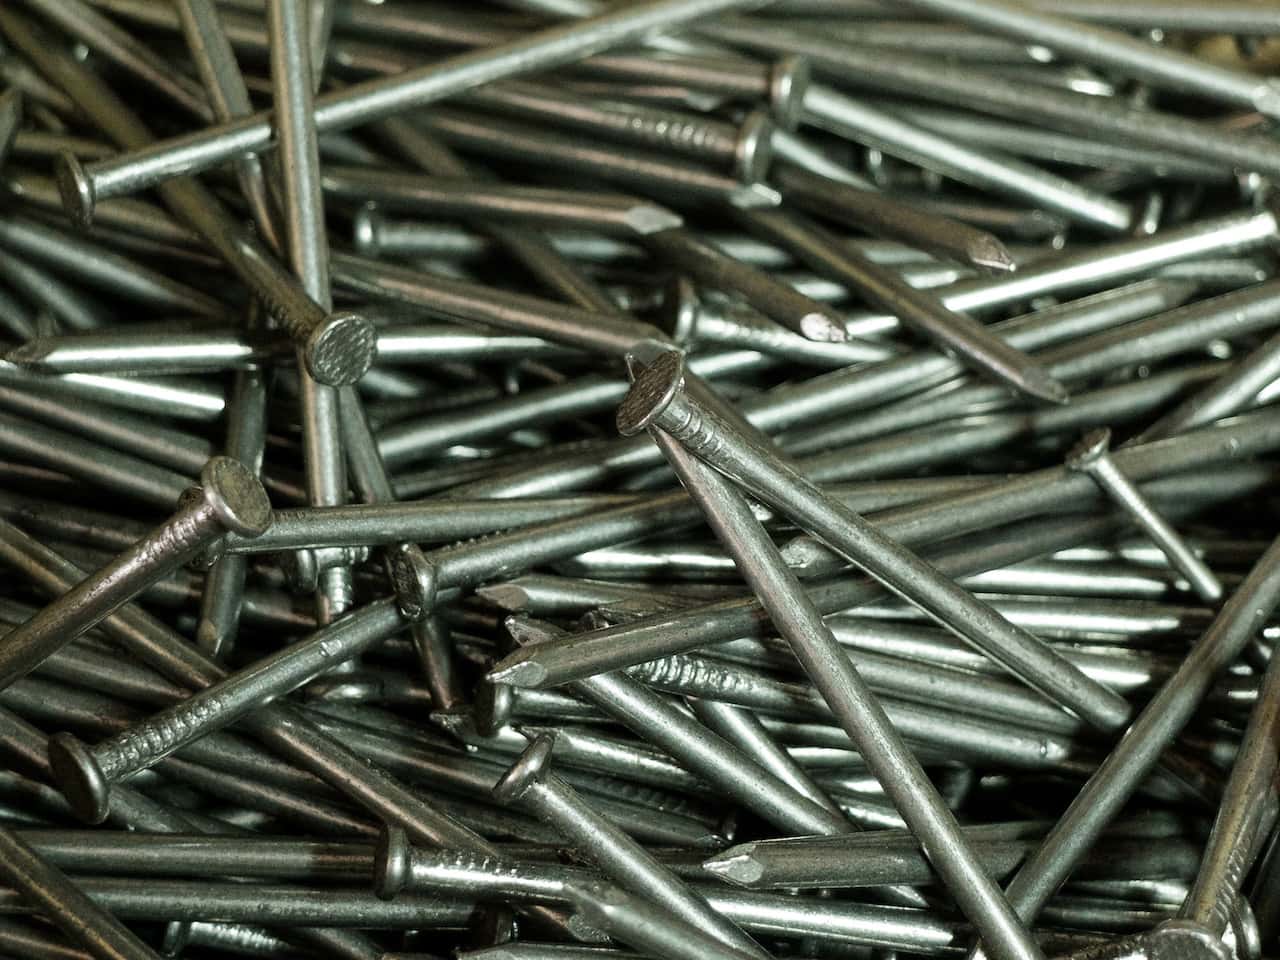 Steel nails that are a part of the best roofing material list